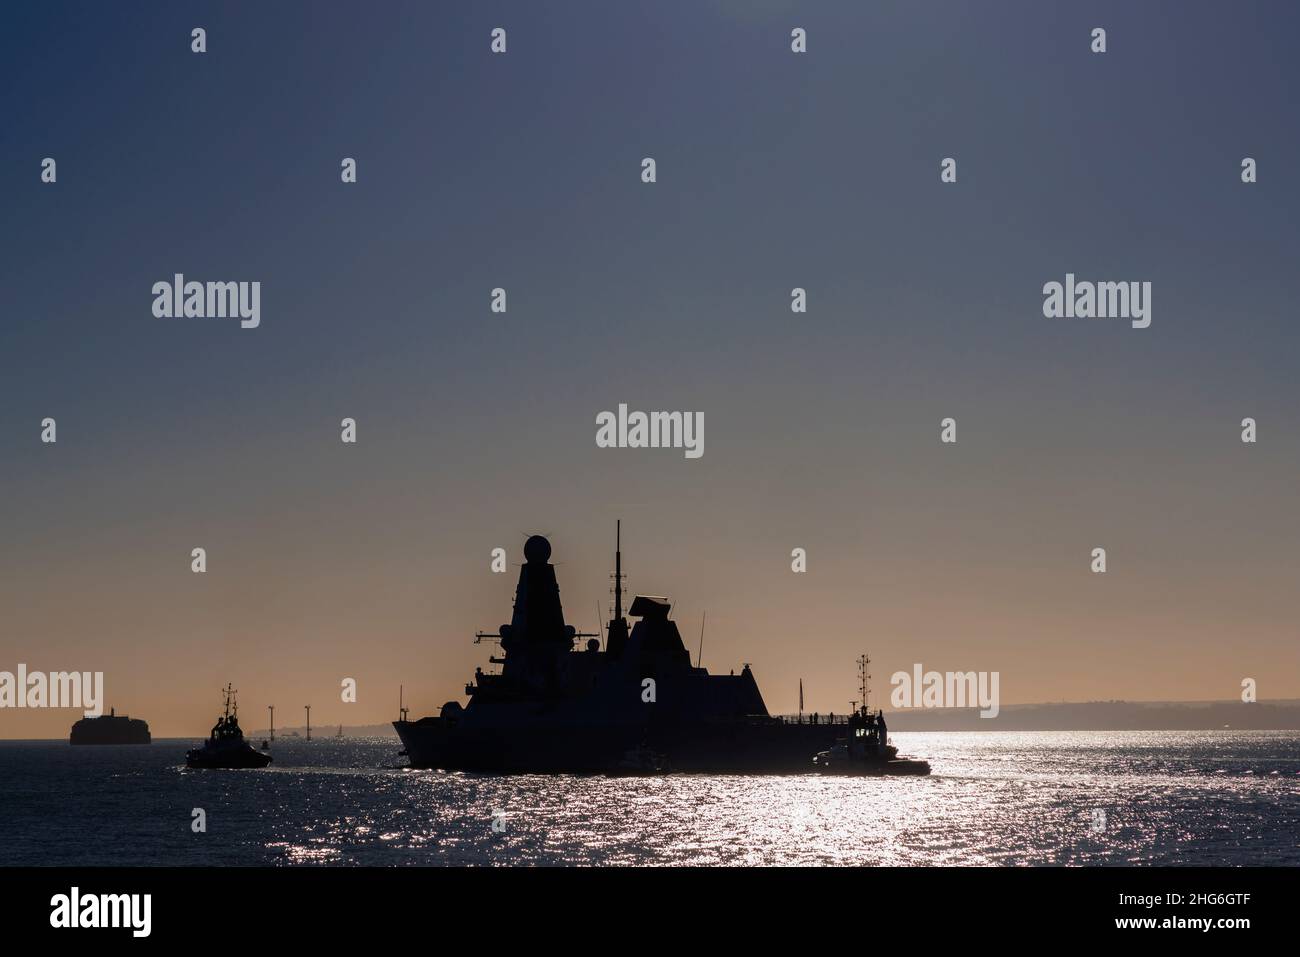 D35 HMS Dragon, one of the Royal Navy’s Type 45 air defence destroyers, departing from Portsmouth Harbour, Portsmouth, Hampshire, south coast England Stock Photo